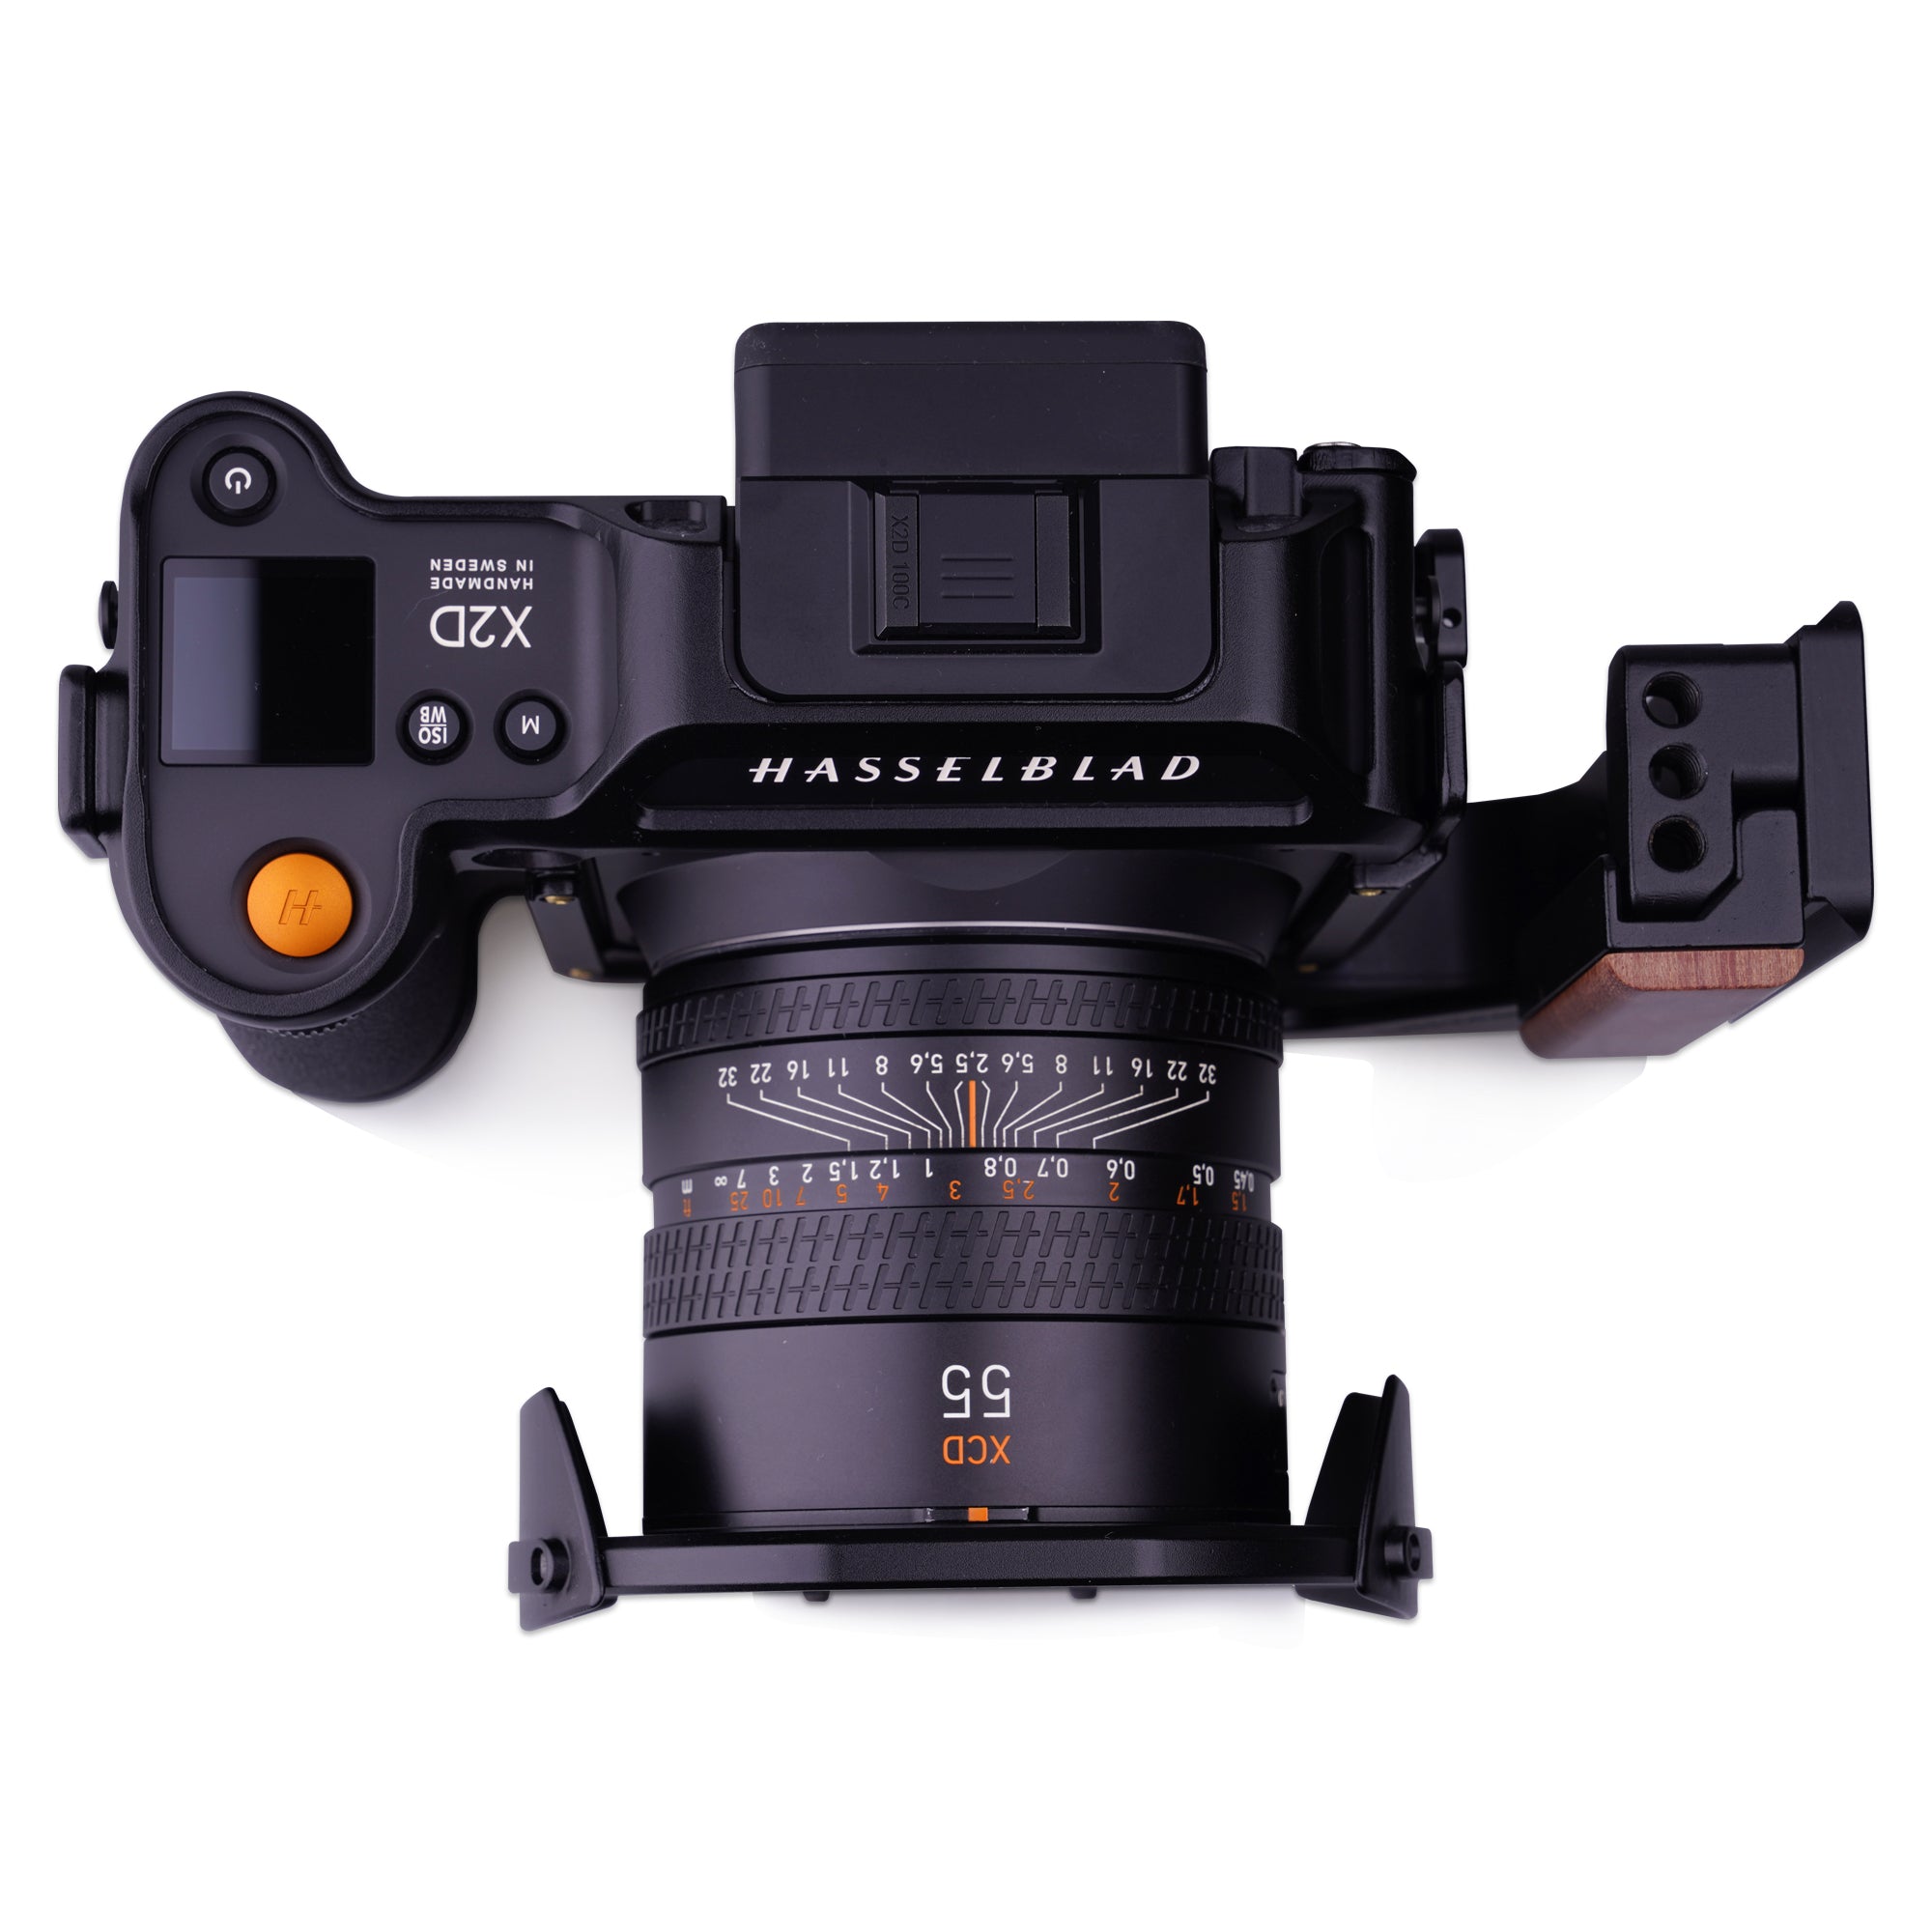 Lanhorse Modular Cage and Portrait Quick-lease for Hasselblad X2D 100C, Lens Protector Frame Options.